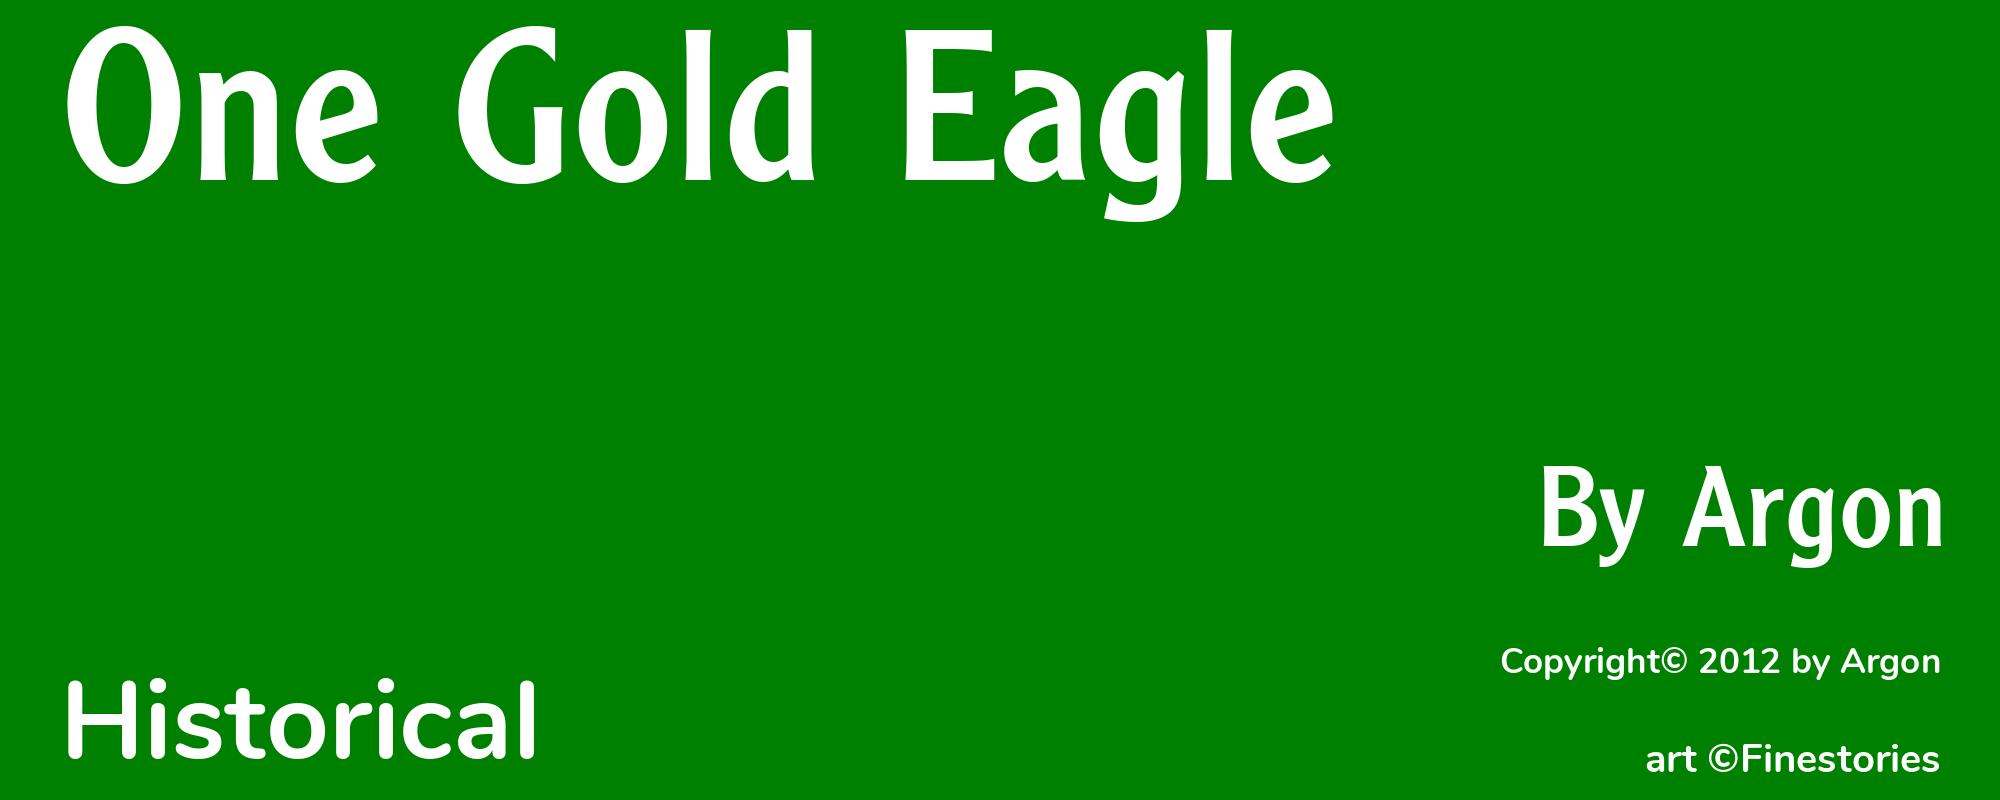 One Gold Eagle - Cover